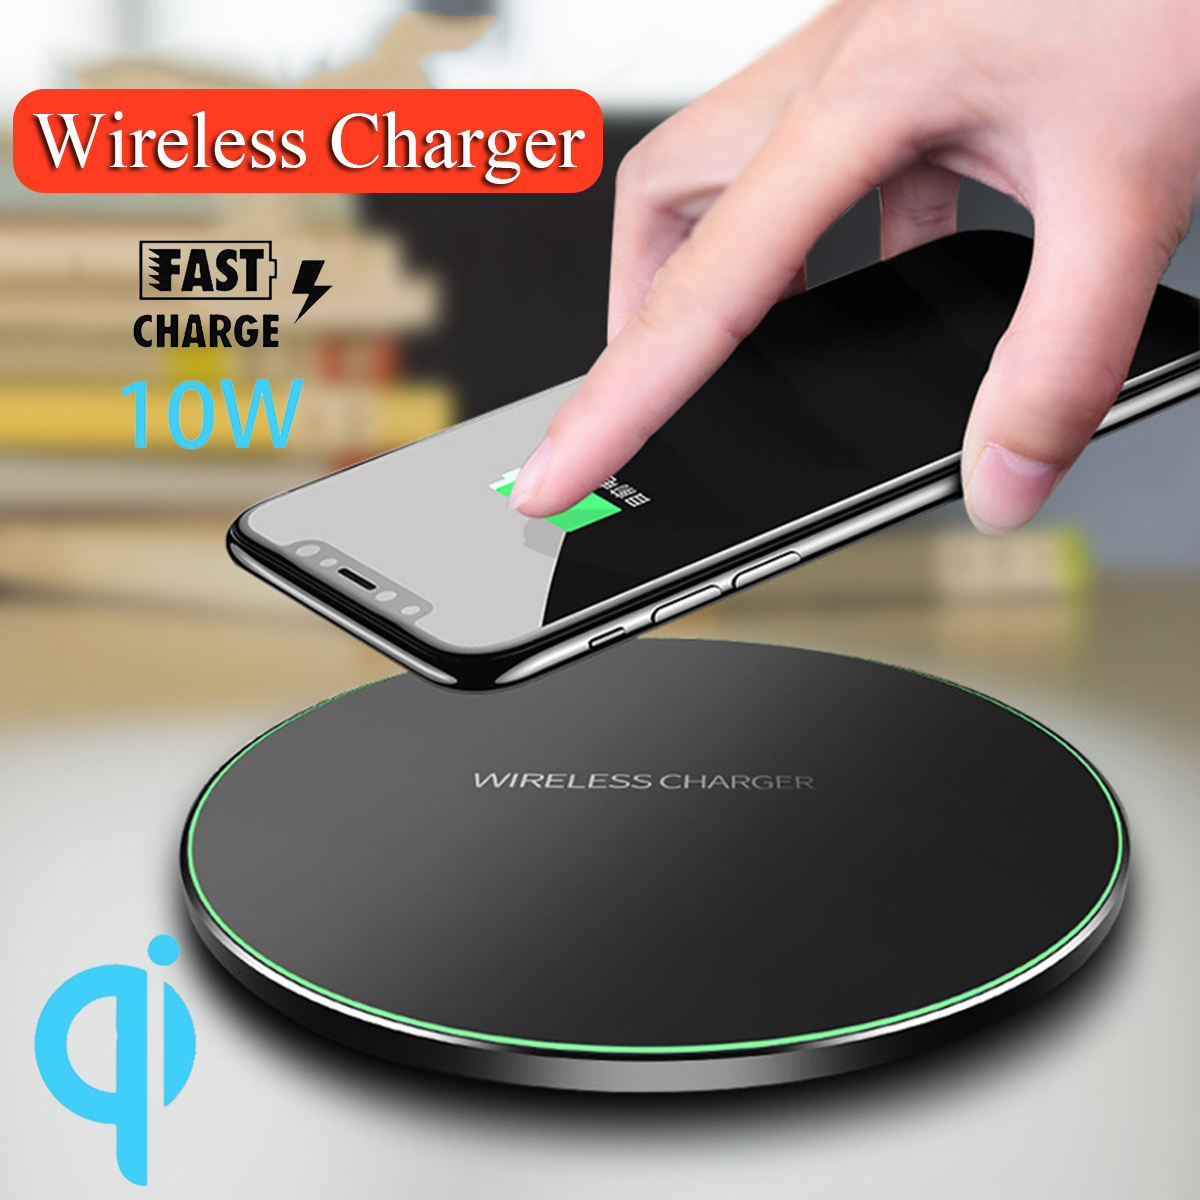 Bakeey-Aluminum-QI-Wireless-Fast-Charger-Charging-Dock-Pad-Mat-Phone-For-iPhone-XS-XR-X-1366096-5